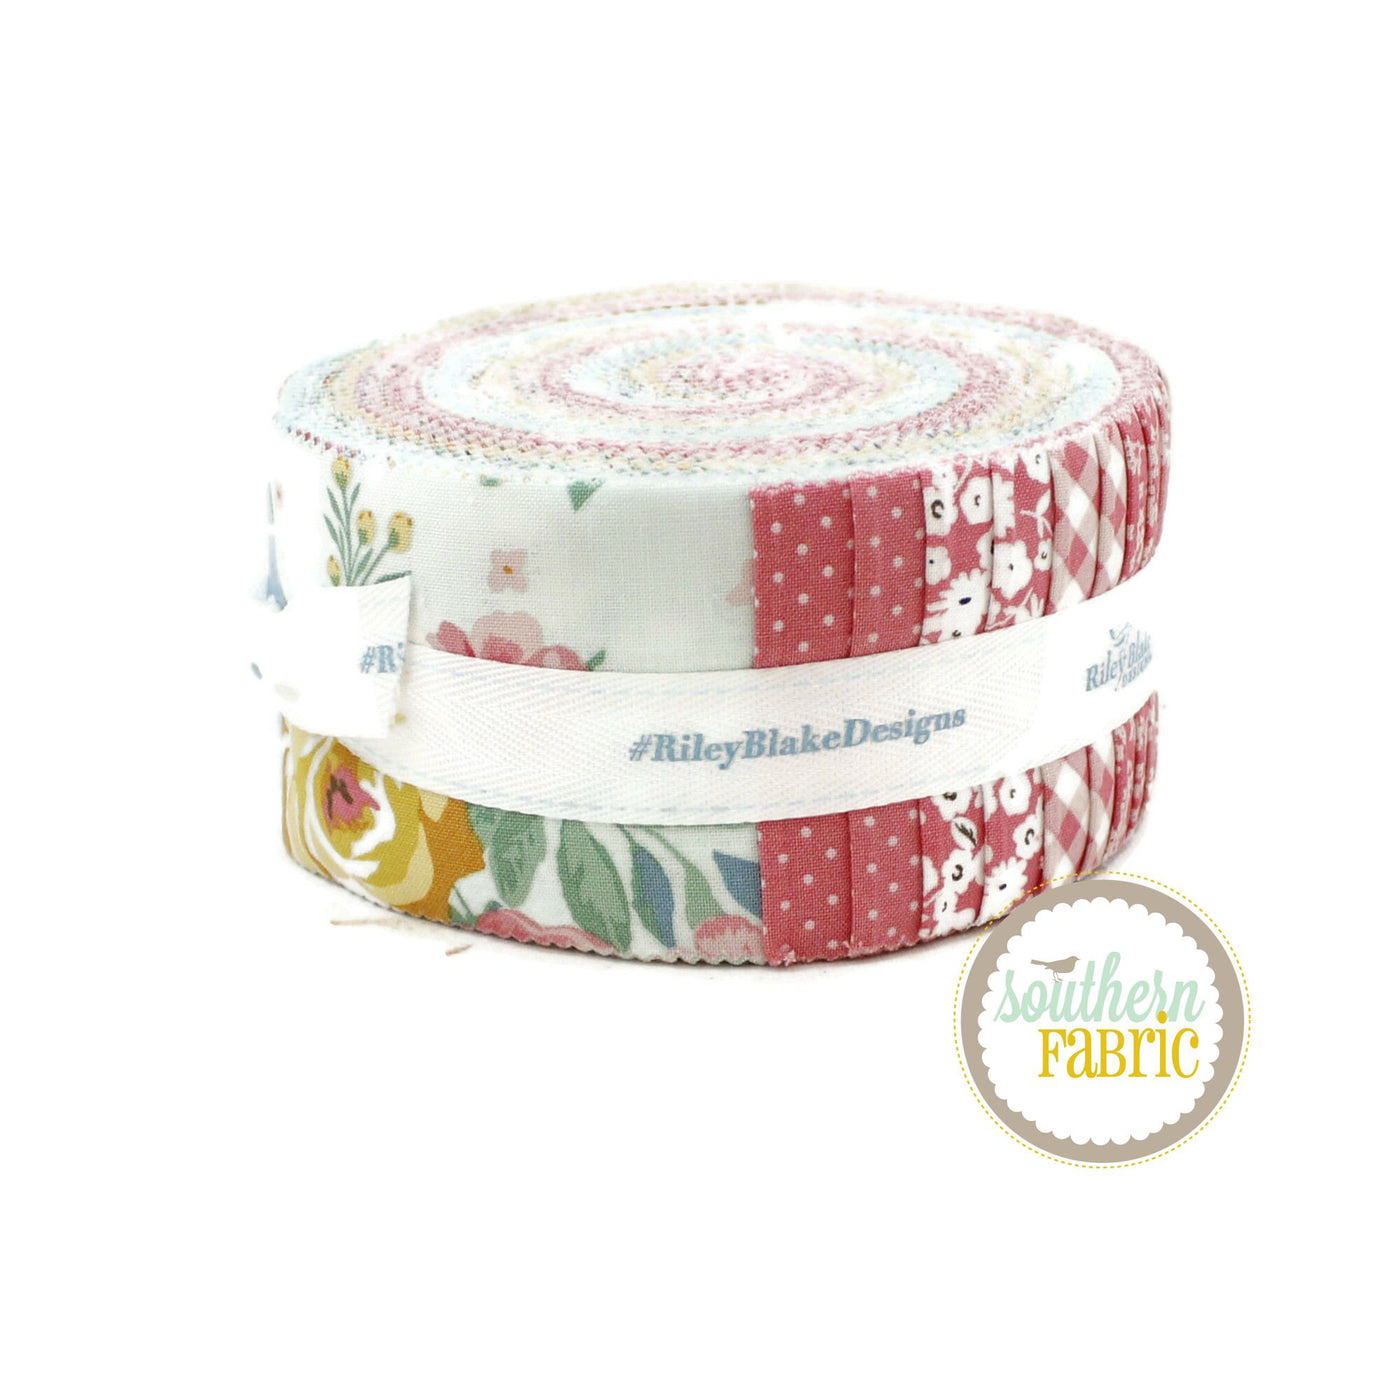 Spring Gardens Jelly Roll (40 pcs) by My Mind's Eye for Riley Blake (RP-14110-40)